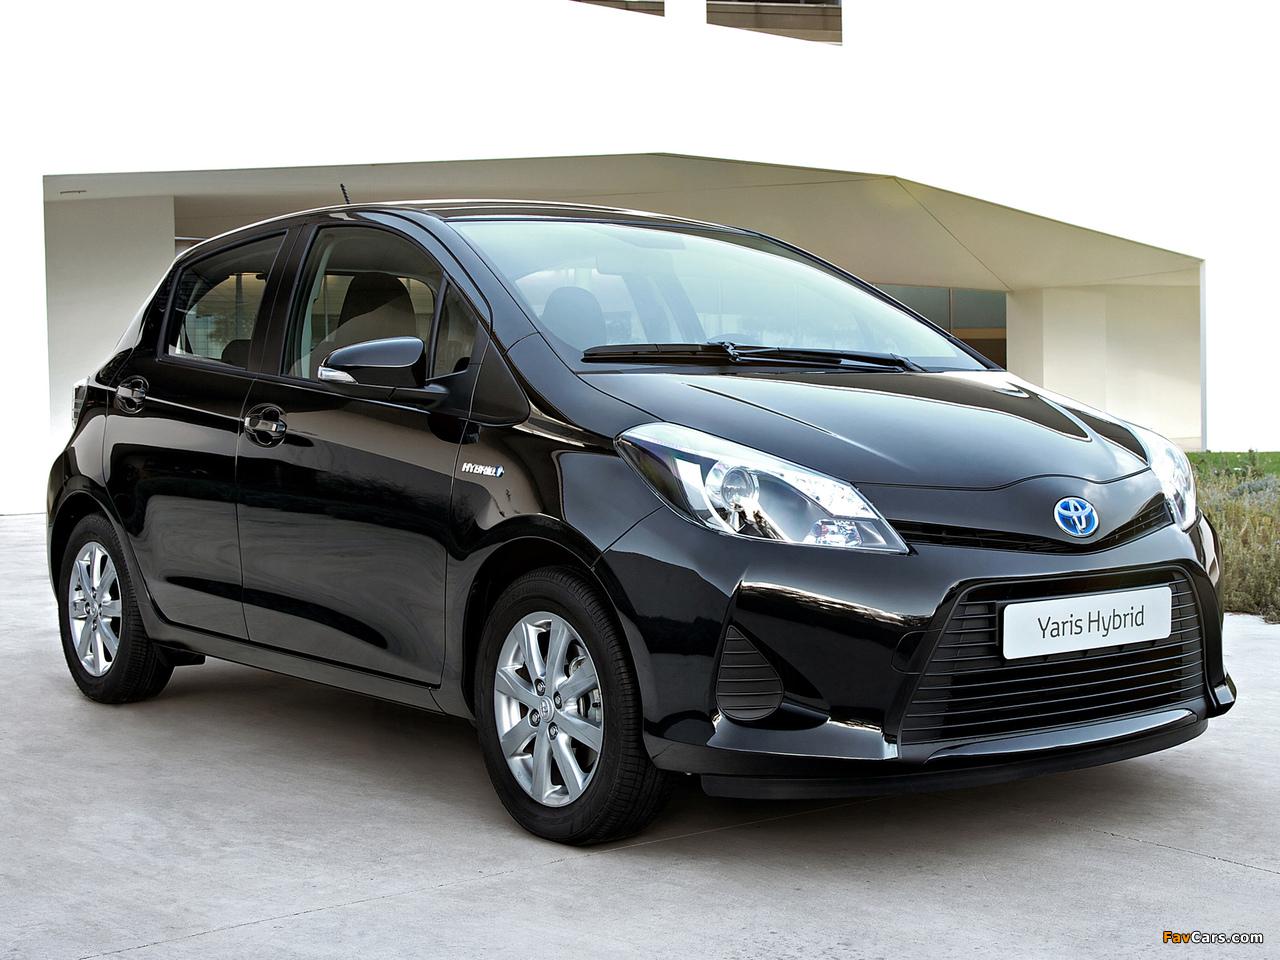 Toyota Yaris Hybrid 2012 pictures (1280 x 960)